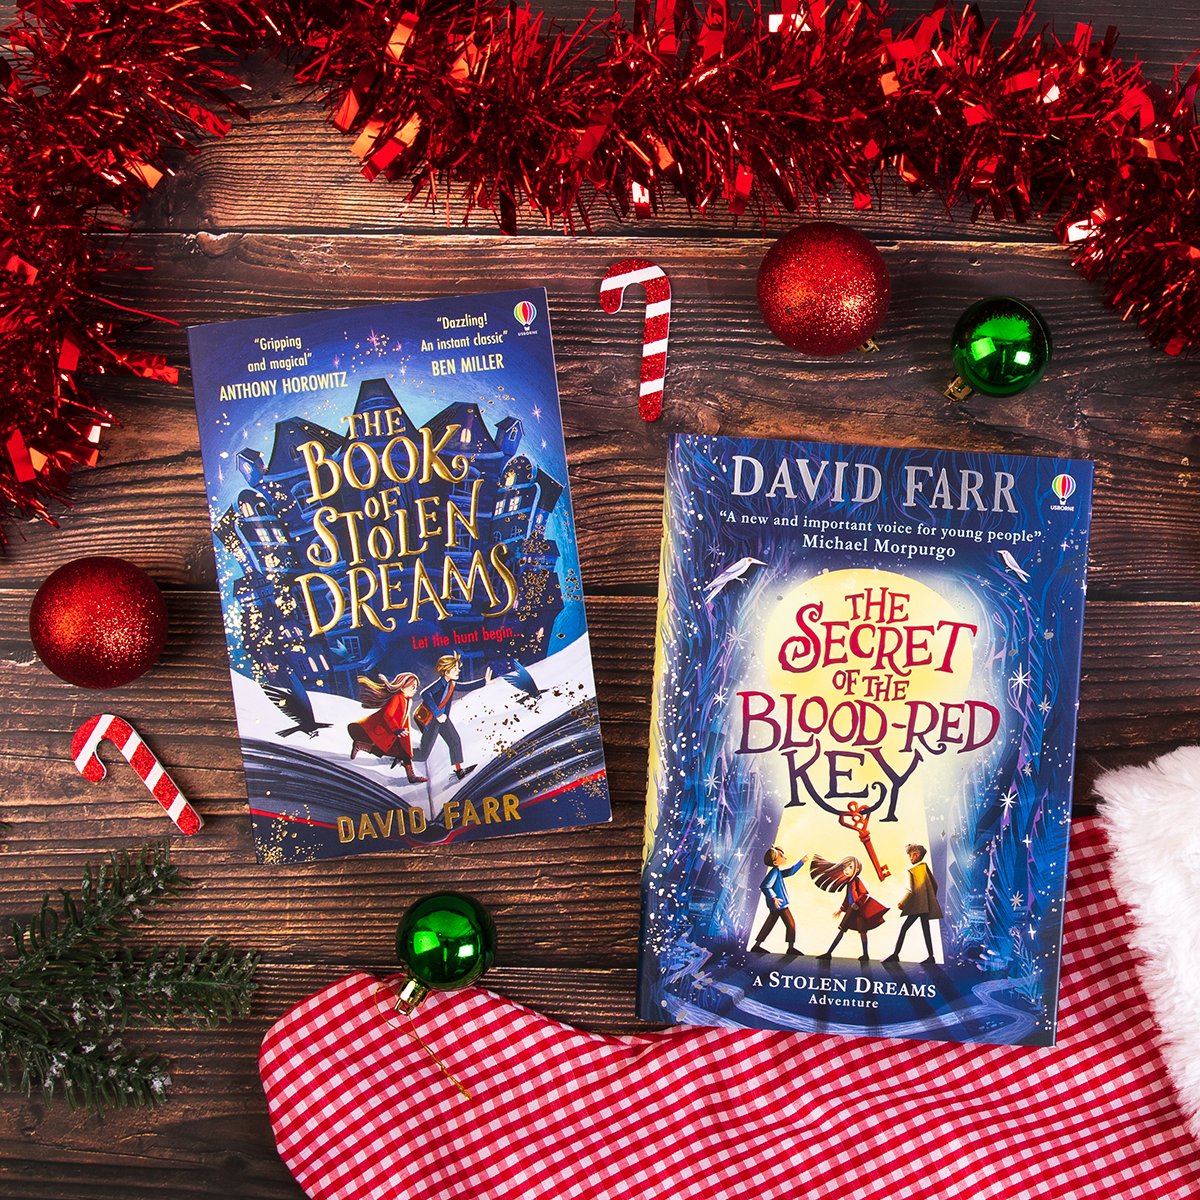 To celebrate the countdown to Christmas, we're giving away some of our brilliant books of 2023! 🌟 For the chance to win two unforgettable adventures: The Secret of the Blood-Red Key AND The Book of Stolen Dreams from @DavidFarrUK, follow us and retweet. UK only. Ends 28/11.